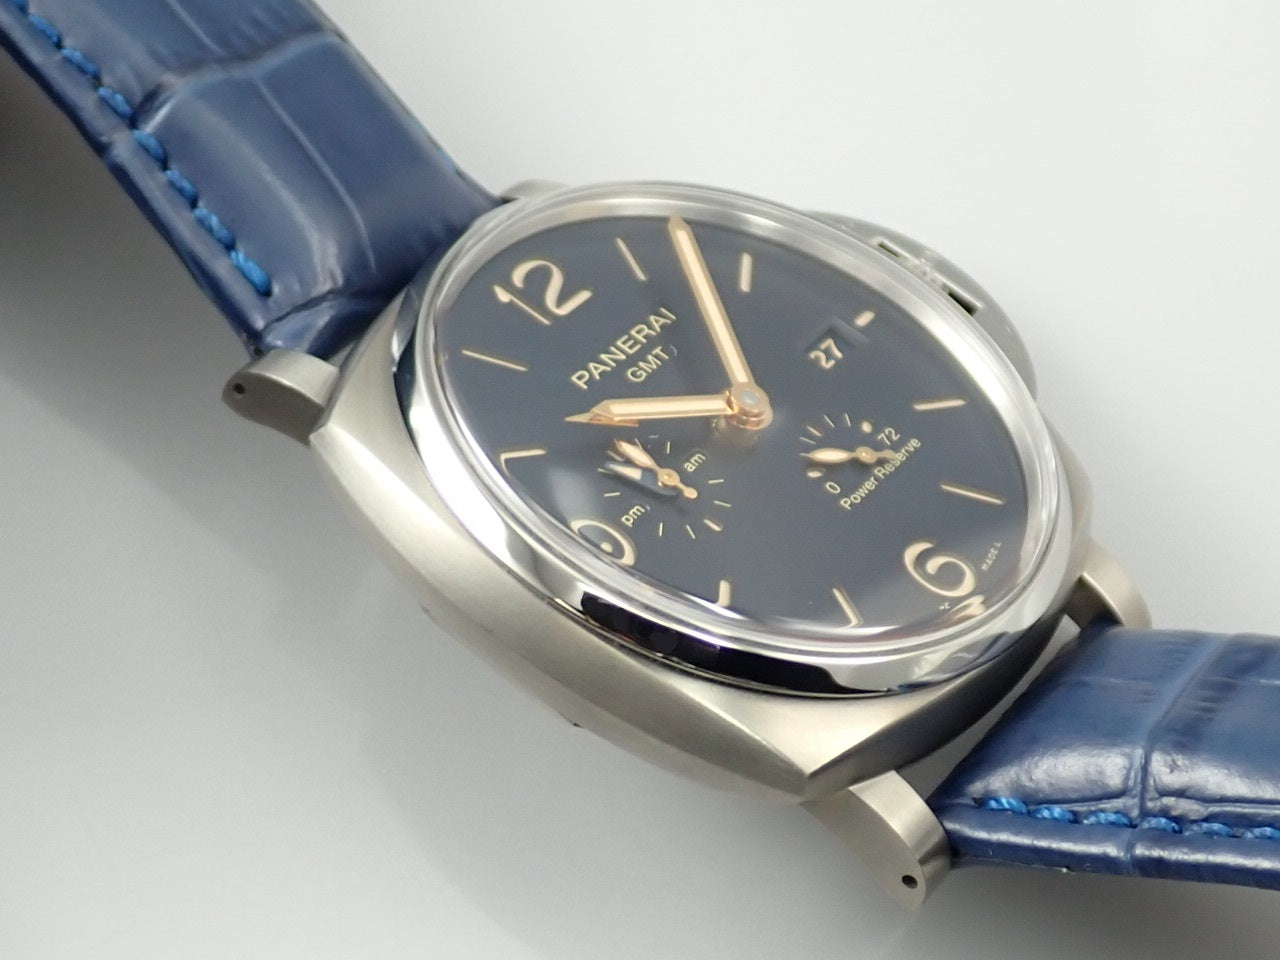 Panerai Luminor Due GMT [Good Condition] [Warranty Box and Others]